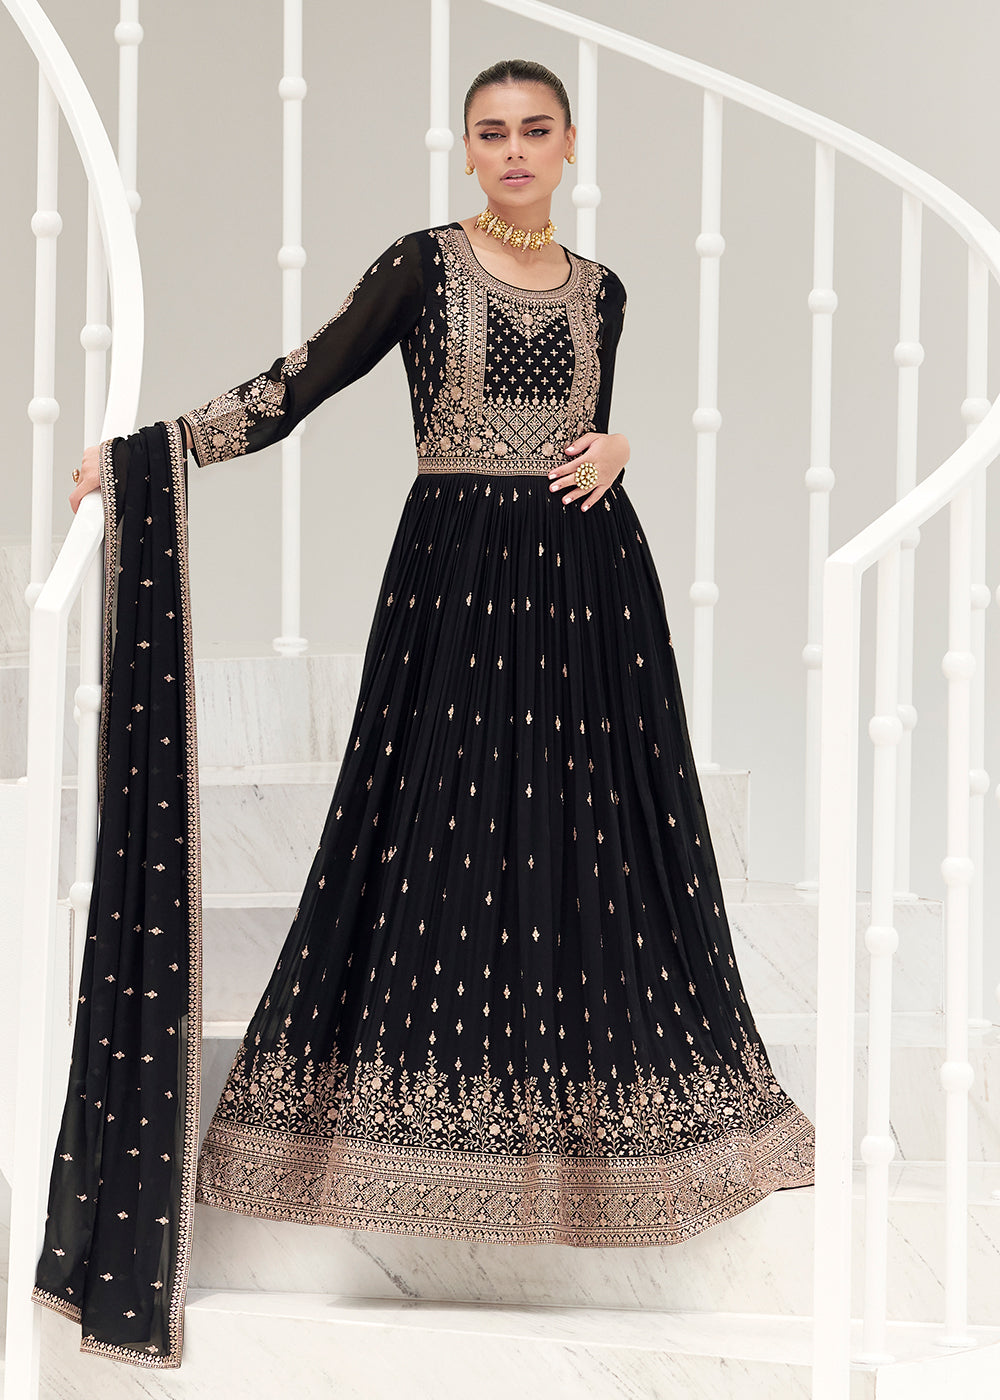 Buy Now Classy Black Real Georgette Party Style Anarkali Suit Online in USA, UK, Australia, New Zealand, Canada & Worldwide at Empress Clothing.